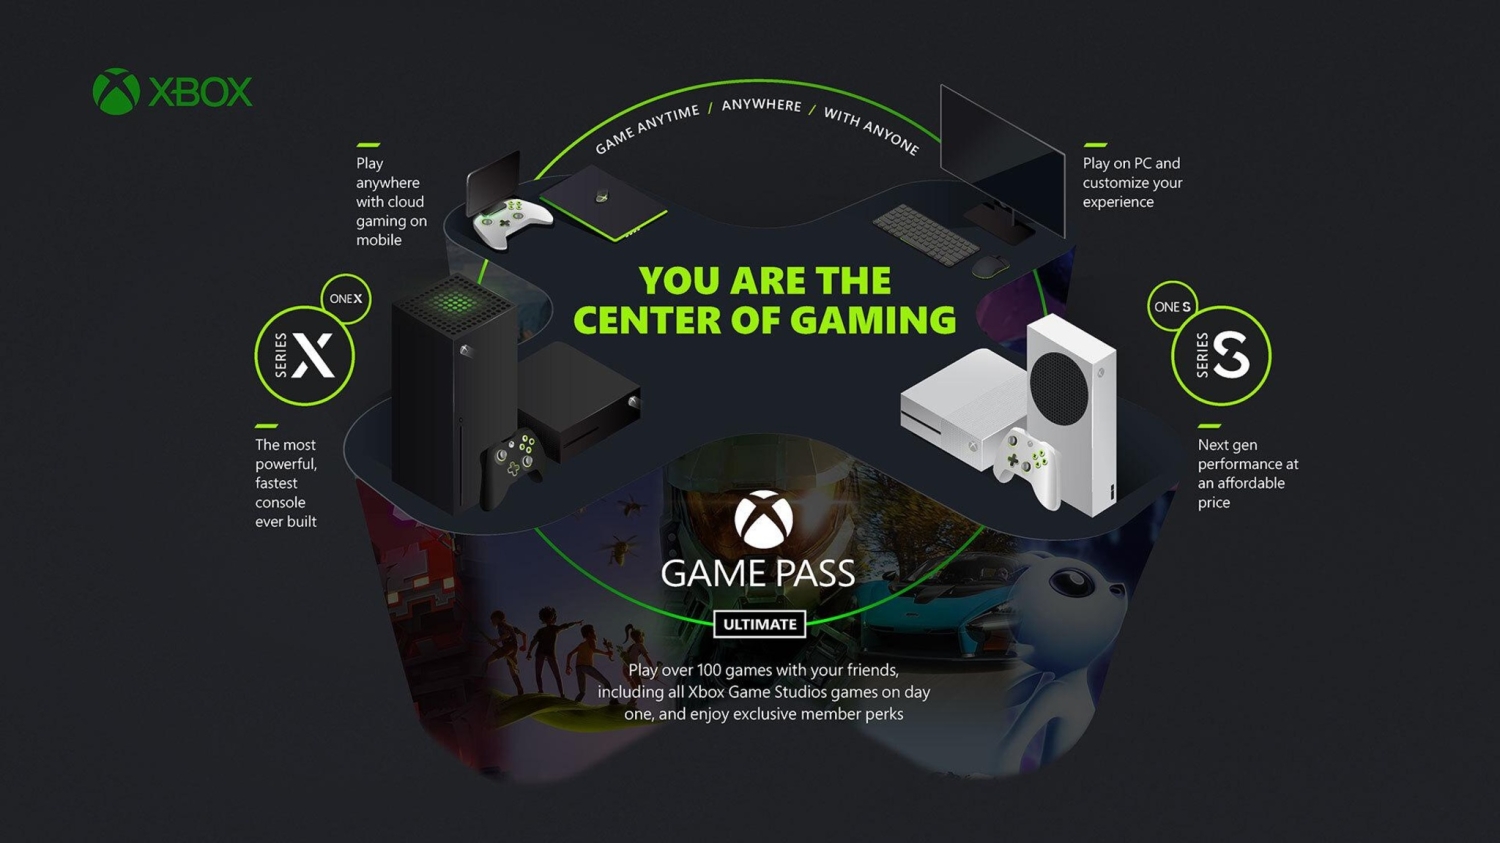 TweakTown Enlarged Image - Microsoft's gaming business model incorporates all existing platforms and delivers games, content, and/or services across consoles, PCs, mobiles, even directly to smart TVs.